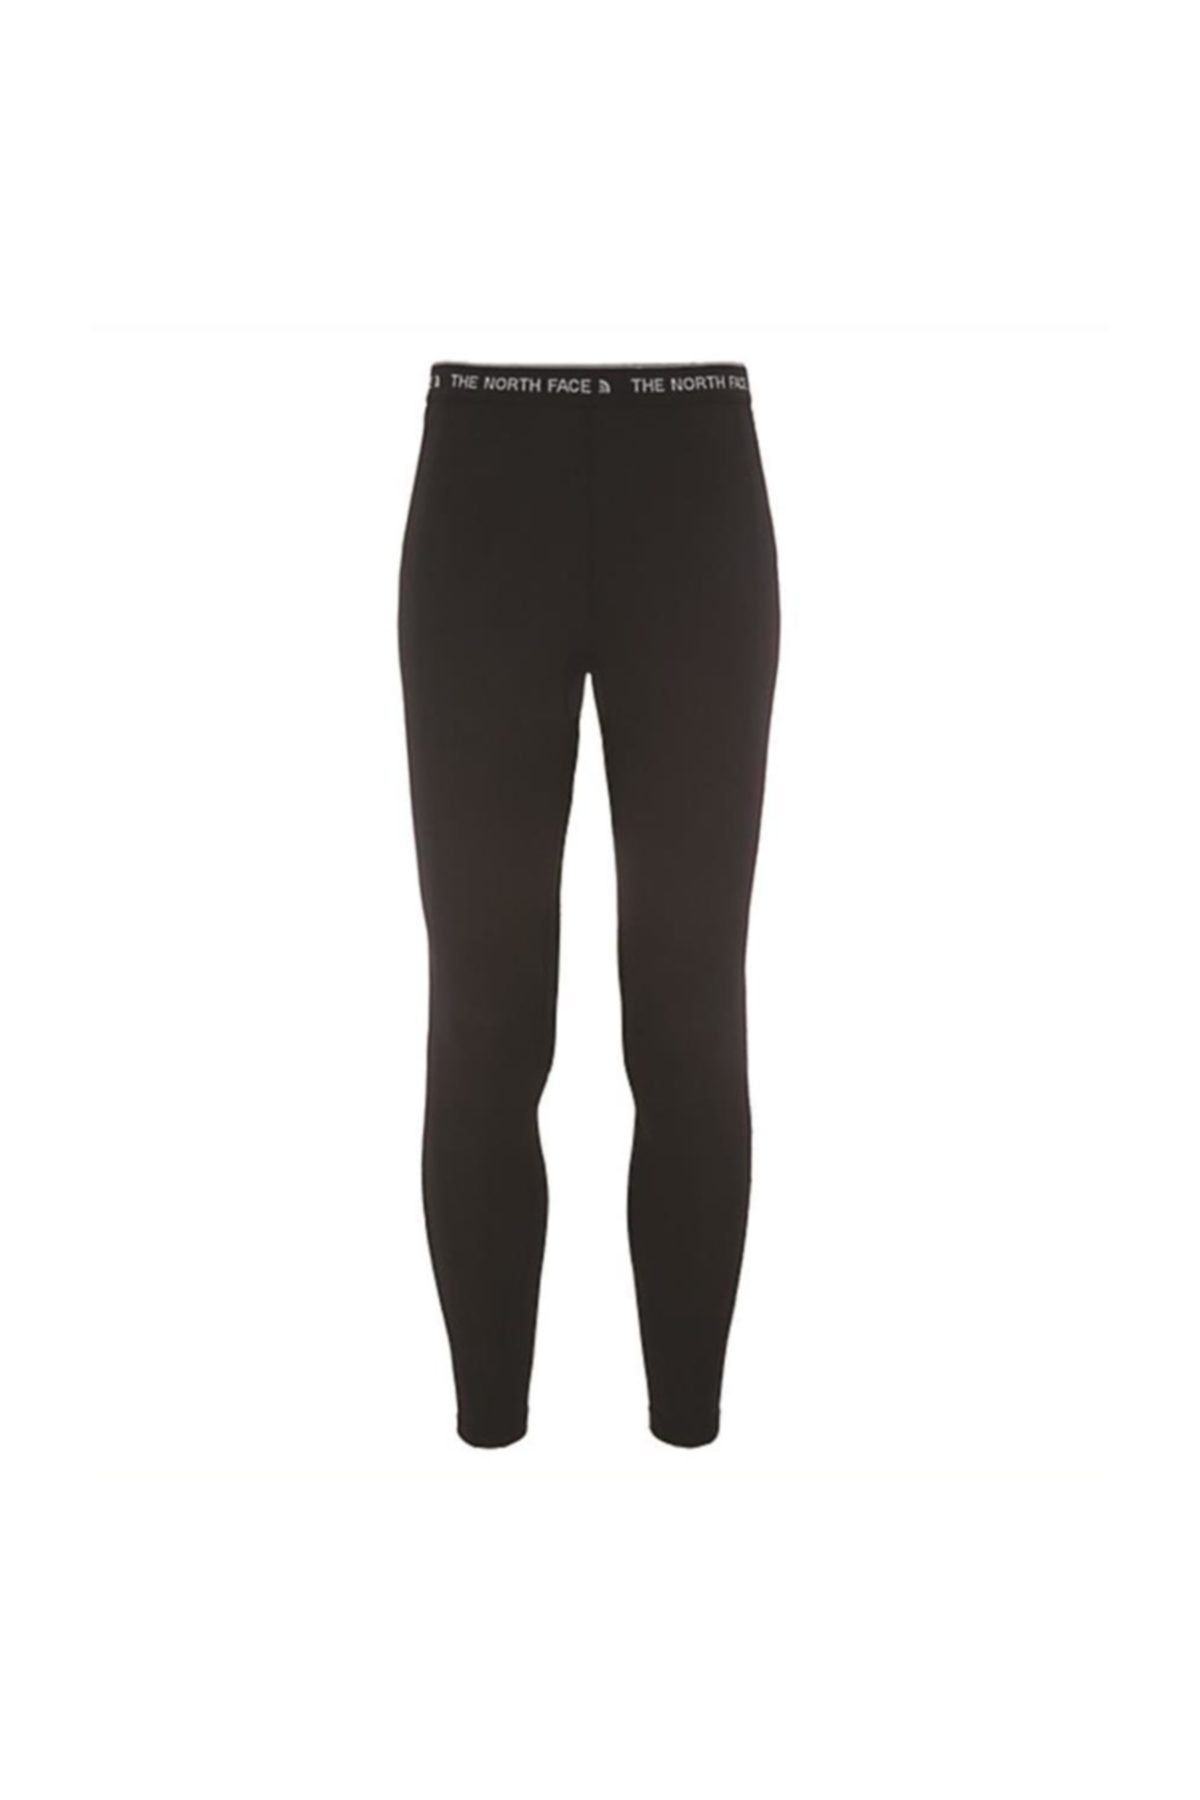 The North Face DotKnit Tight - Women's - Clothing